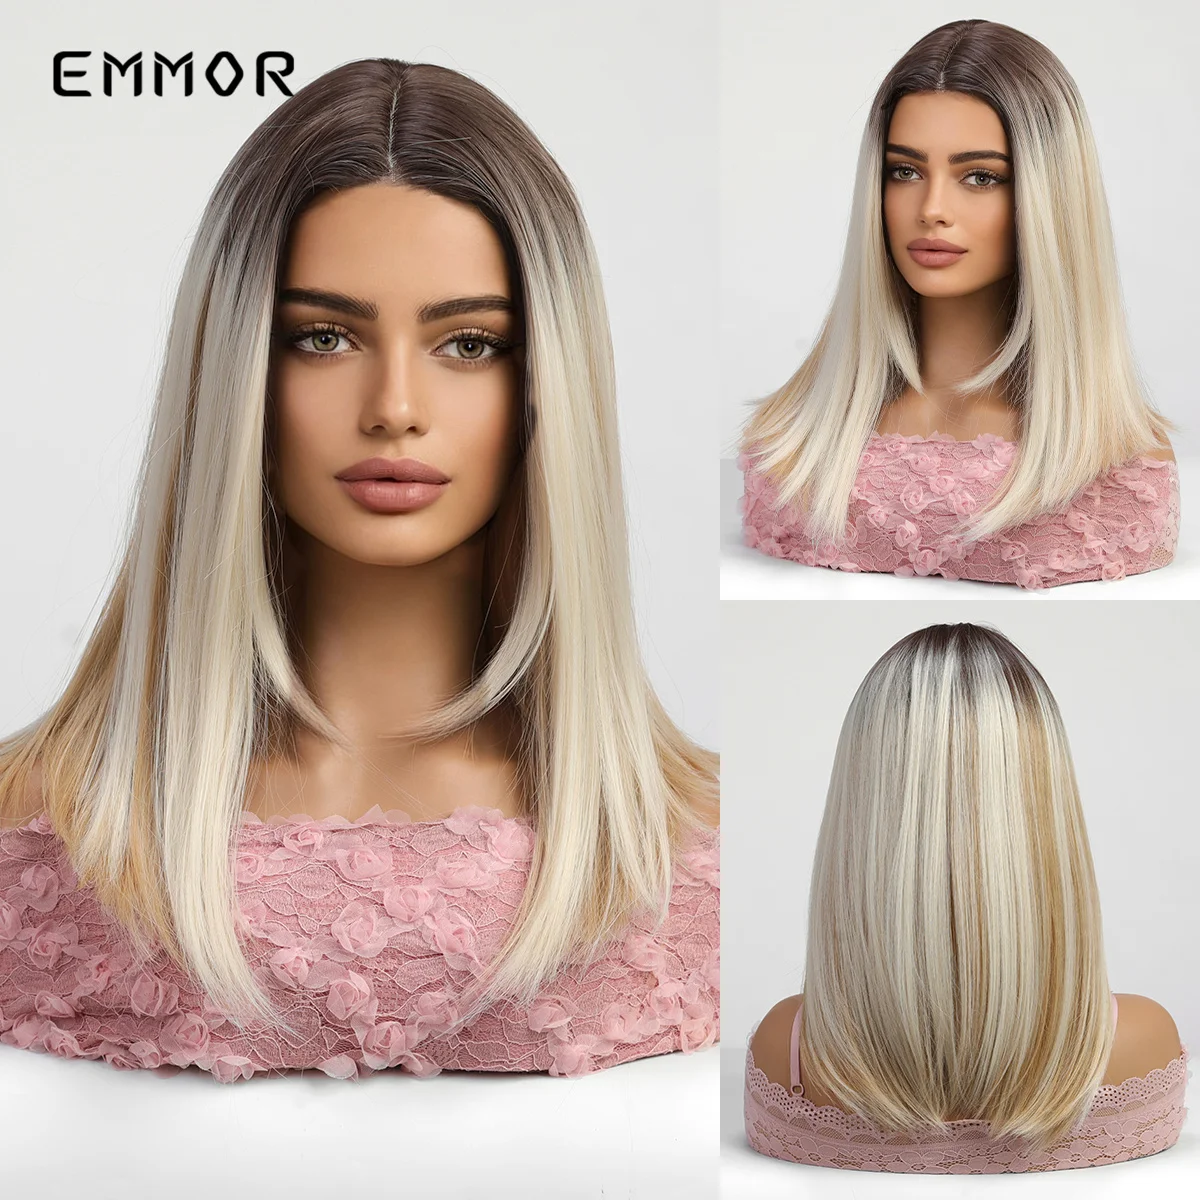 

Emmor-Synthetic T-Part Lace Wig for Women, Long Wavy Ombre, Light Blonde to Brown, Fashion Side Part Nature, Daily Wigs